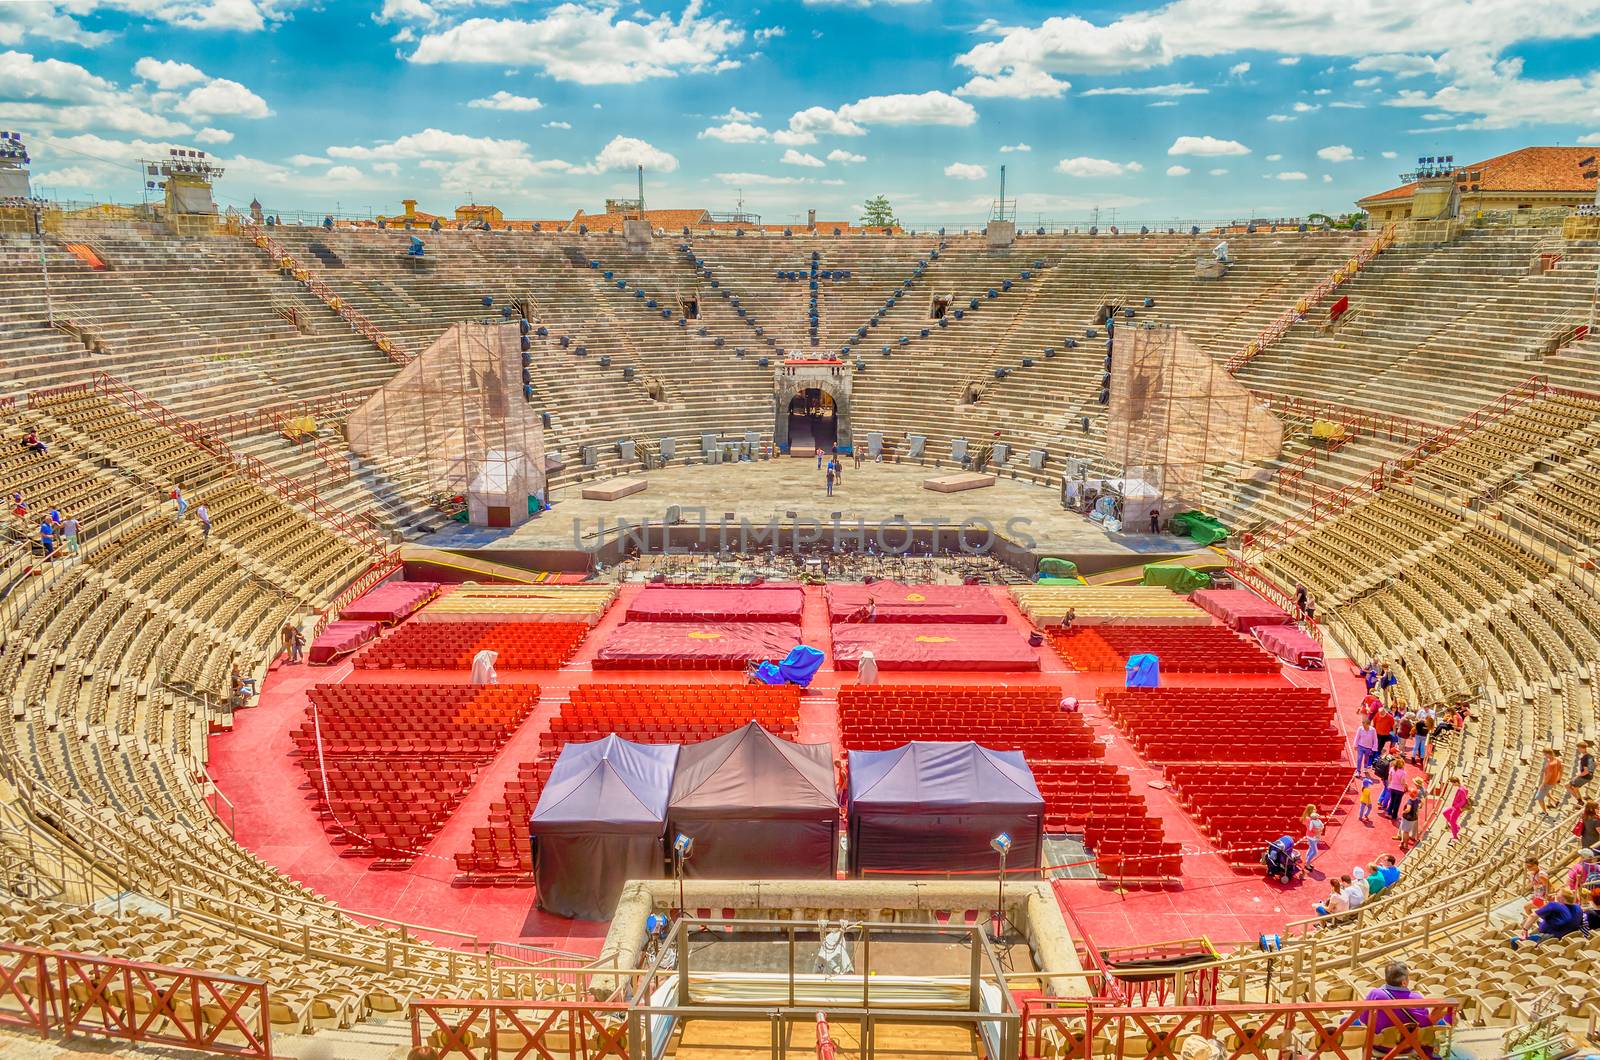 VERONA, ITALY - CIRCA MAY 2014: the Arena di Verona, Italy, circa May 2014. Built by the Romans in the 1st century AD, it is worldwide famous for the large-scale opera performances still given there